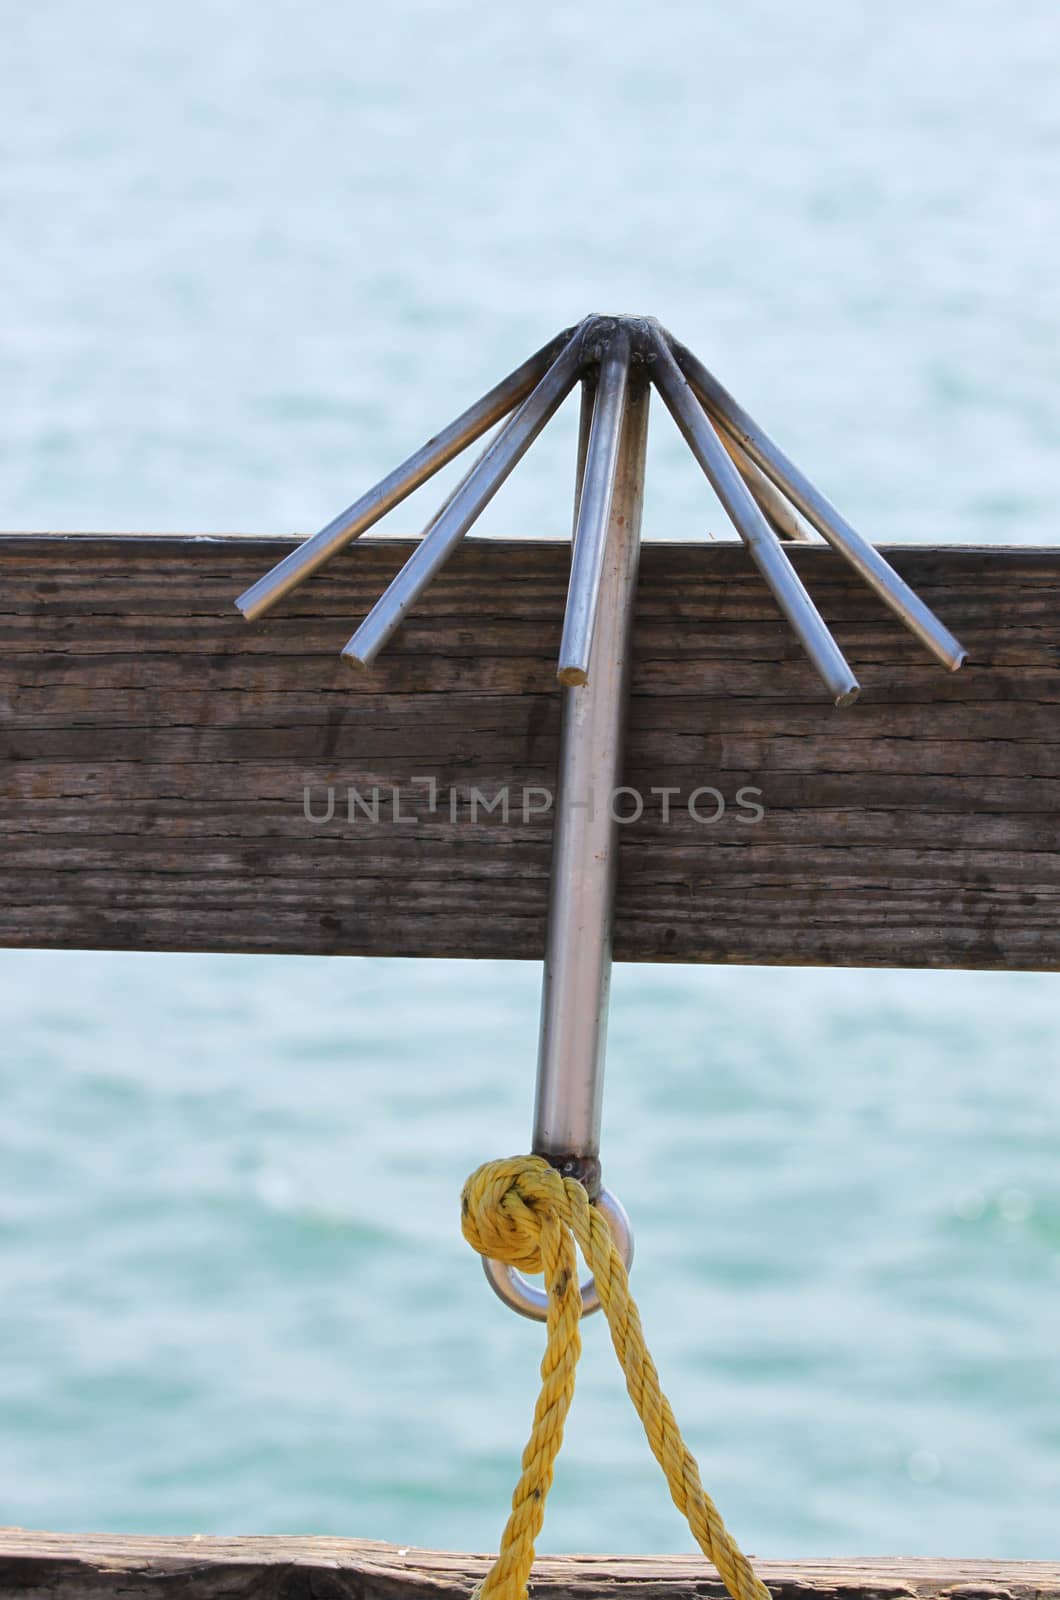 A Hook hanging on a board with the ocean in the background.